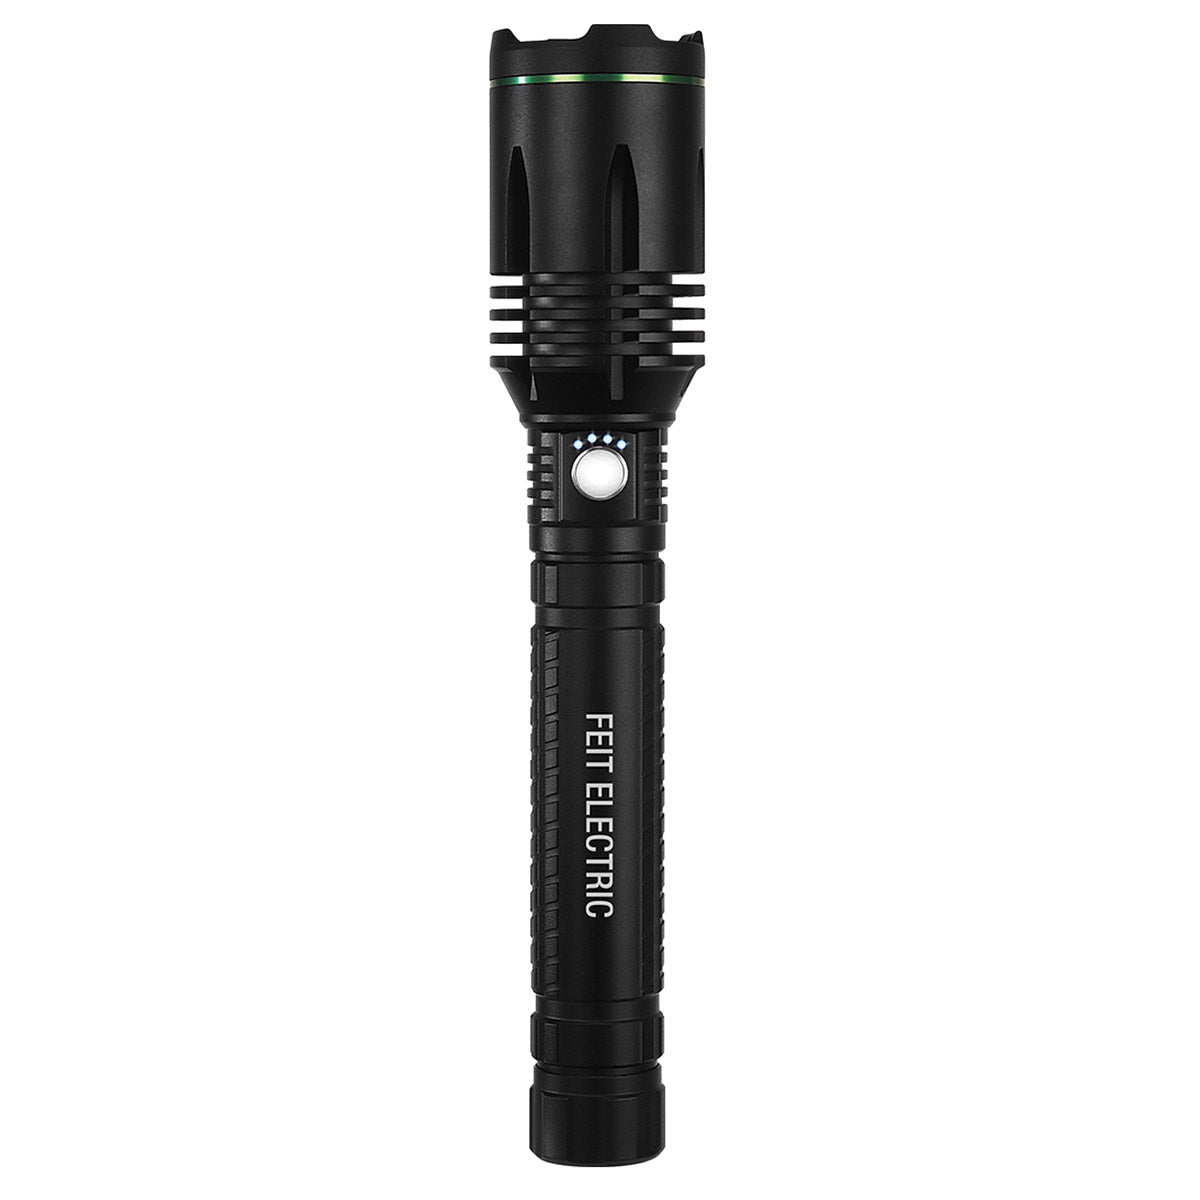 High-Intensity LED Flashlight with 3,000 Lumens, Includes Rechargeable Batteries and Additional 3 "C" Batteries